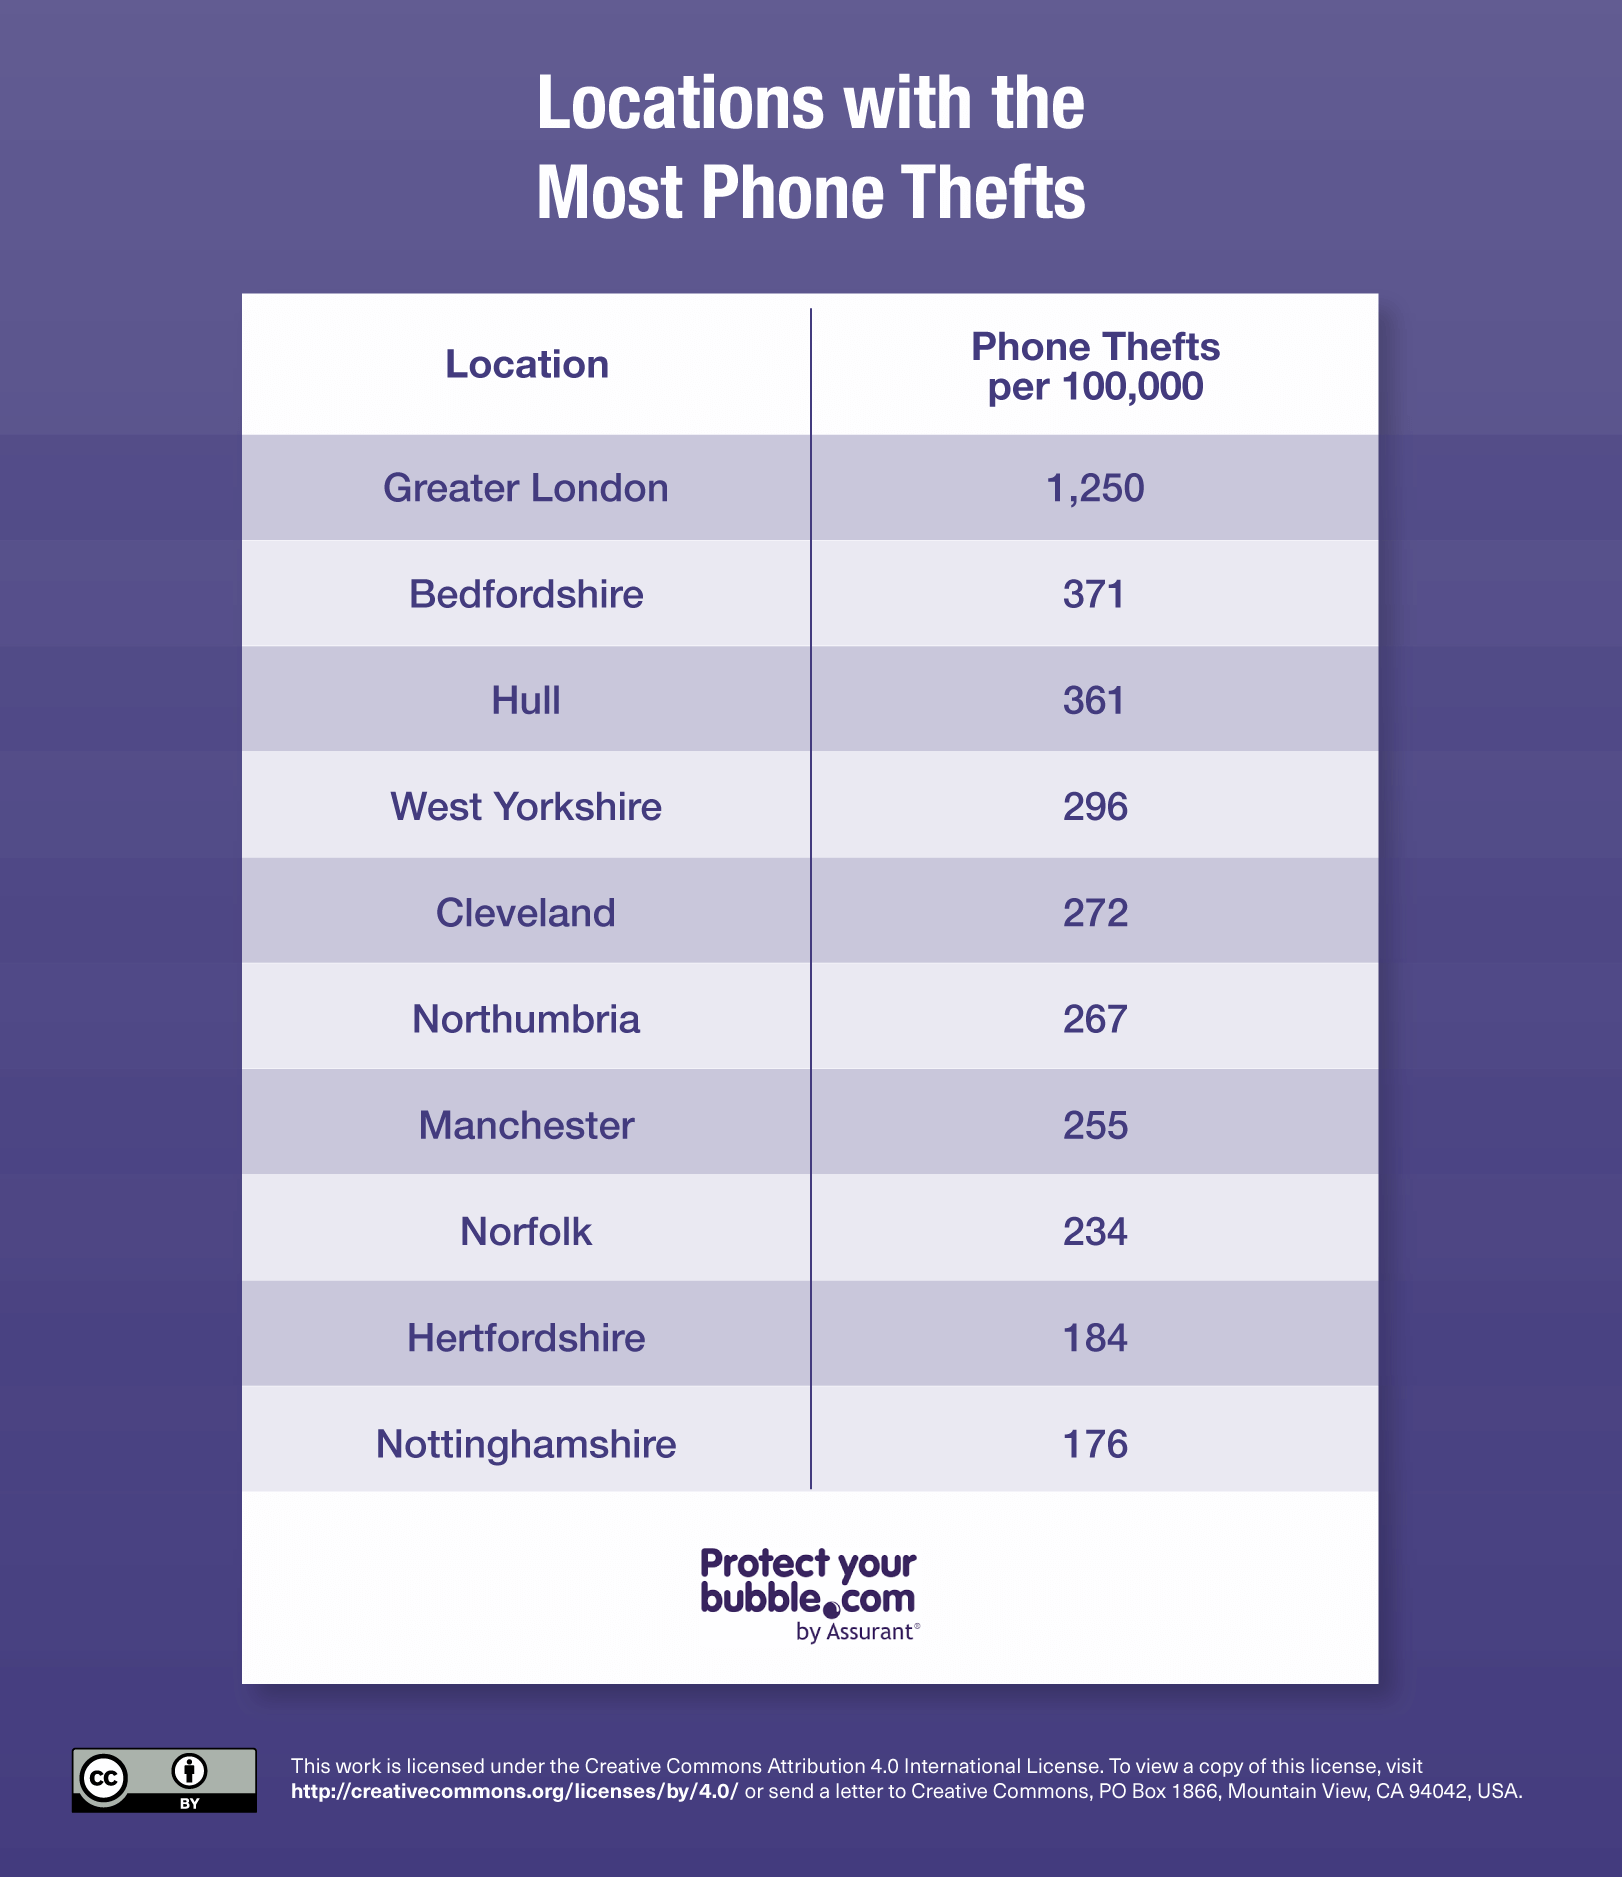 List of UK locations with the most phone thefts